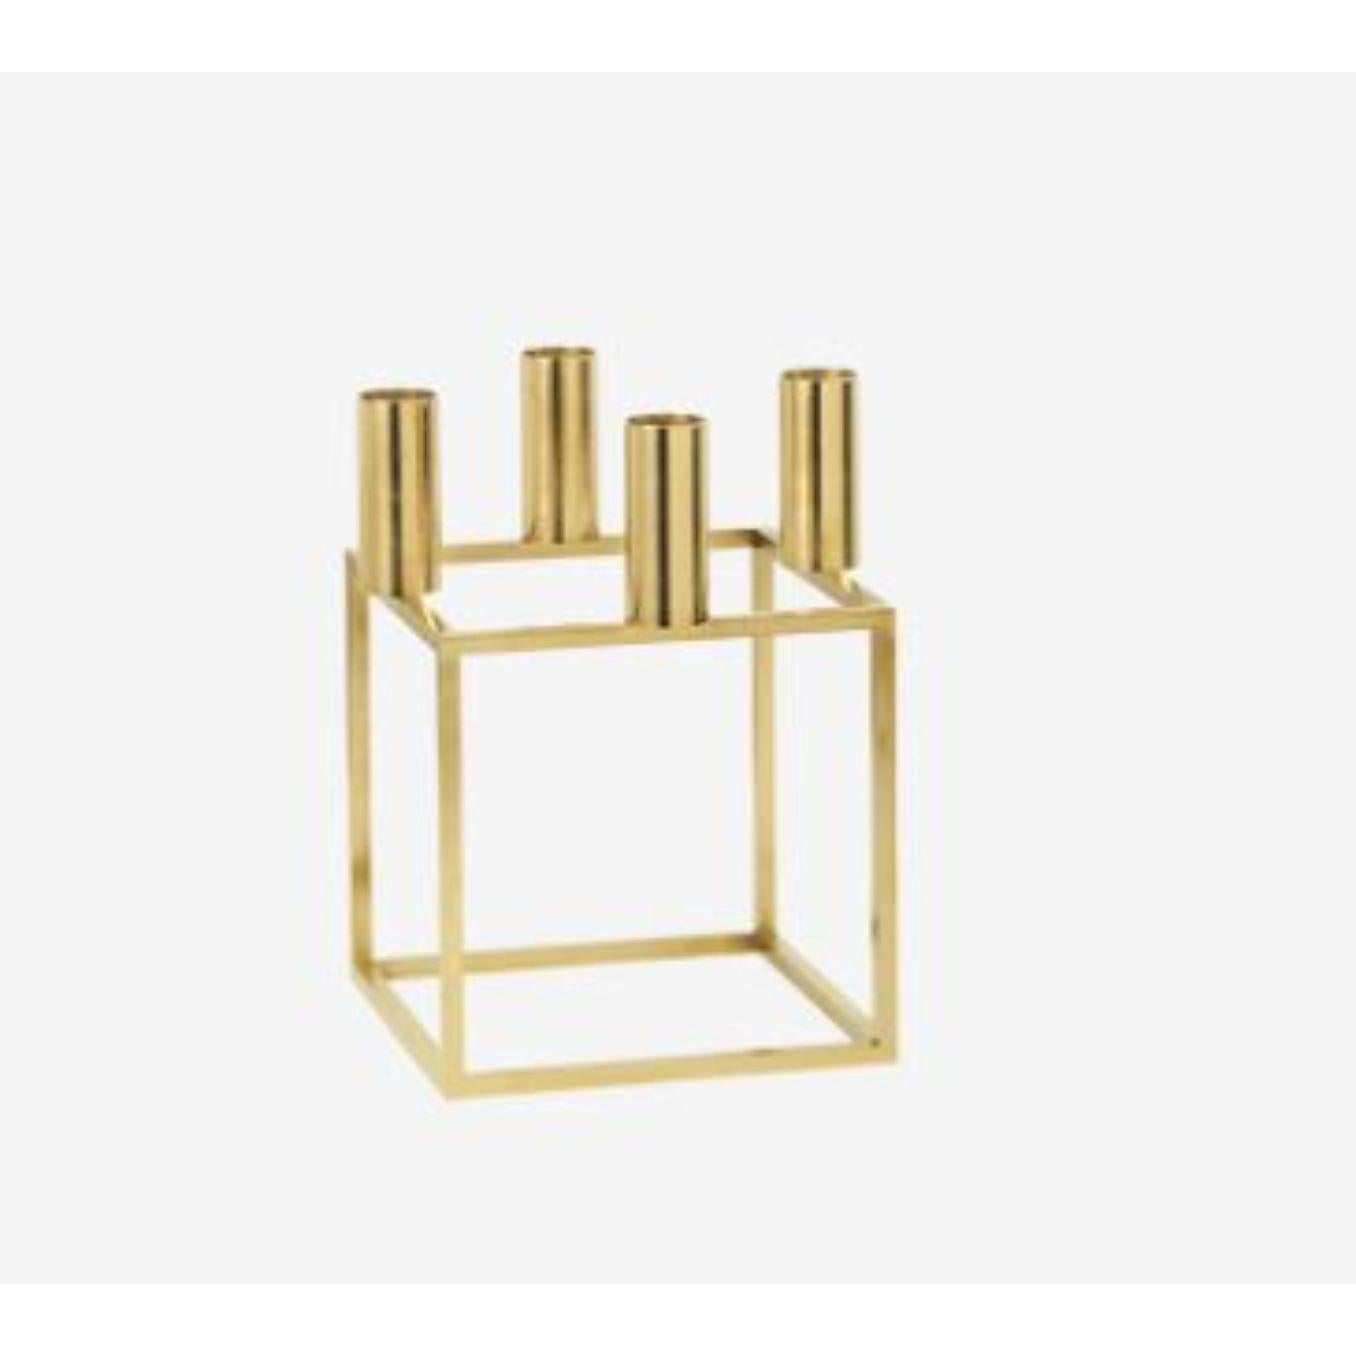 Set of 2 gold plated kubus and base 4 candle holder by Lassen
Dimensions: D 14 x W 14 x H 20 cm 
Materials: Metal 
Also available in different dimensions. 
Weight: 1.50 Kg

A new small wonder has seen the light of day. Kubus Micro is a